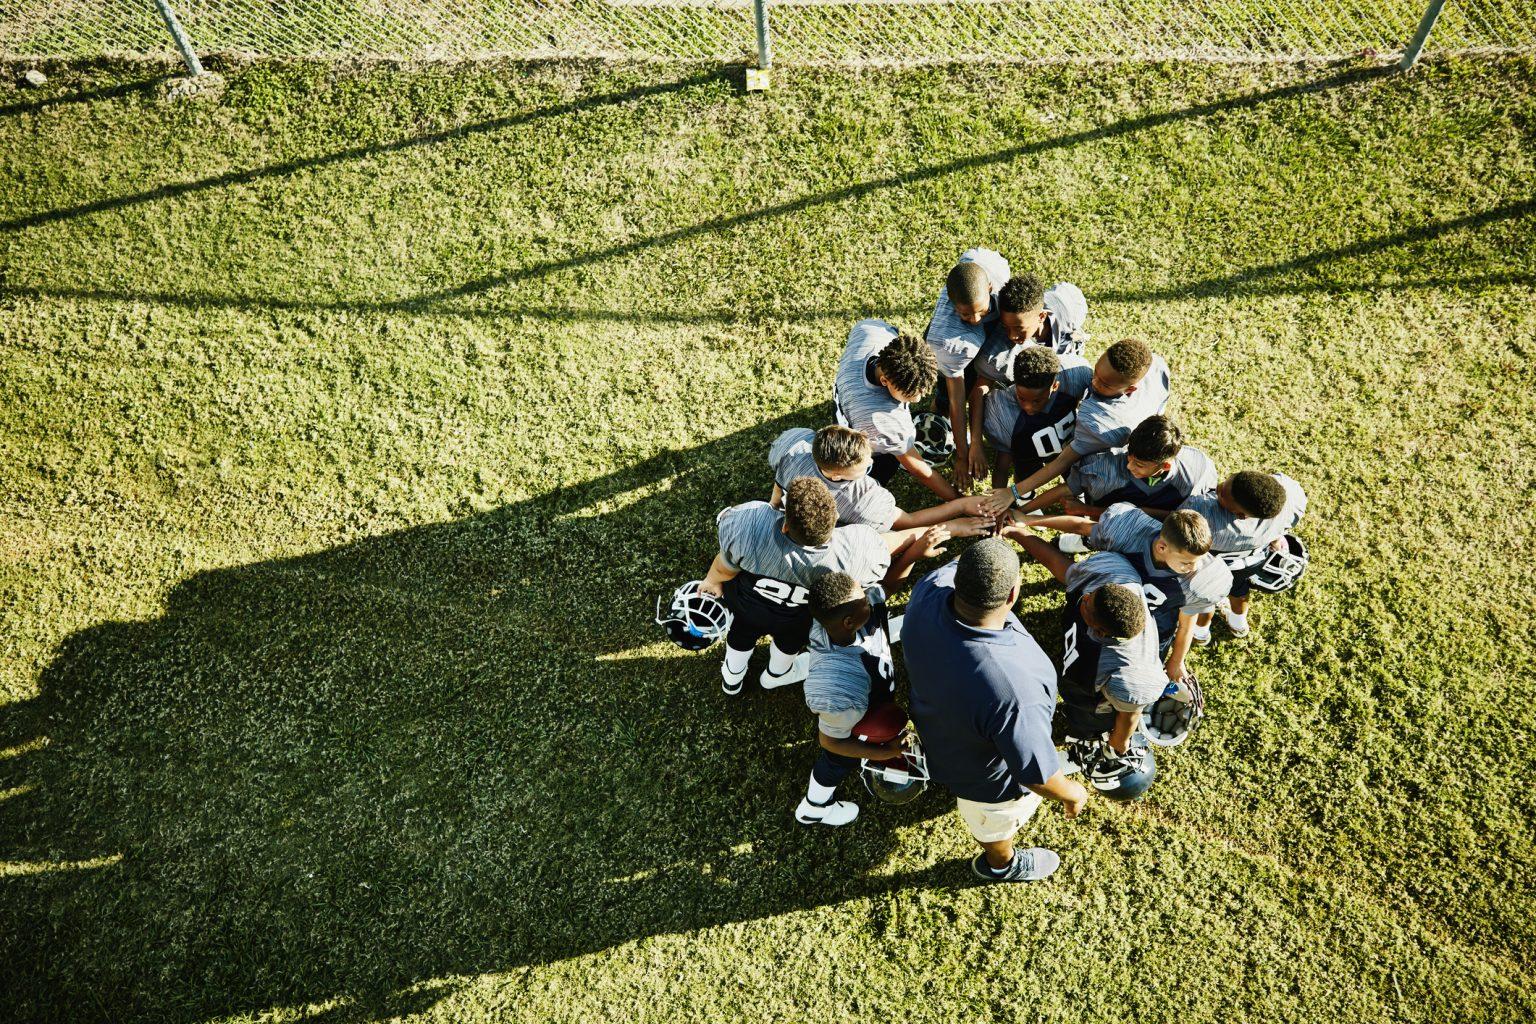 Youth sports football players